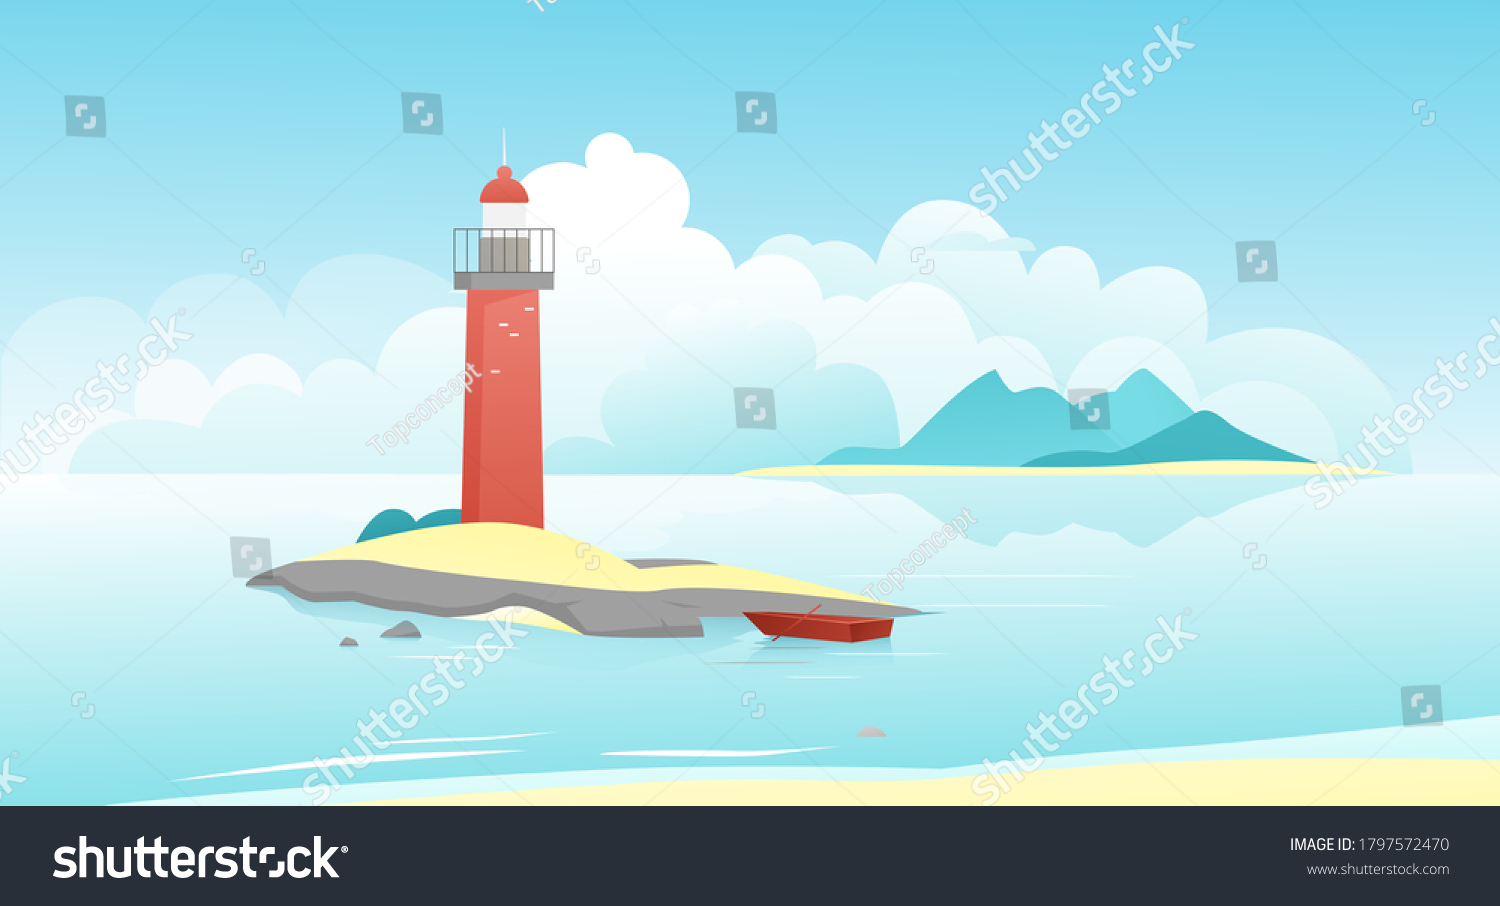 Landscape with lighthouse vector illustration. Cartoon natural peaceful scenery, lighthouse on scenic rock island and moored fishing boat, calm sea water and mountains on horizon, seascape background